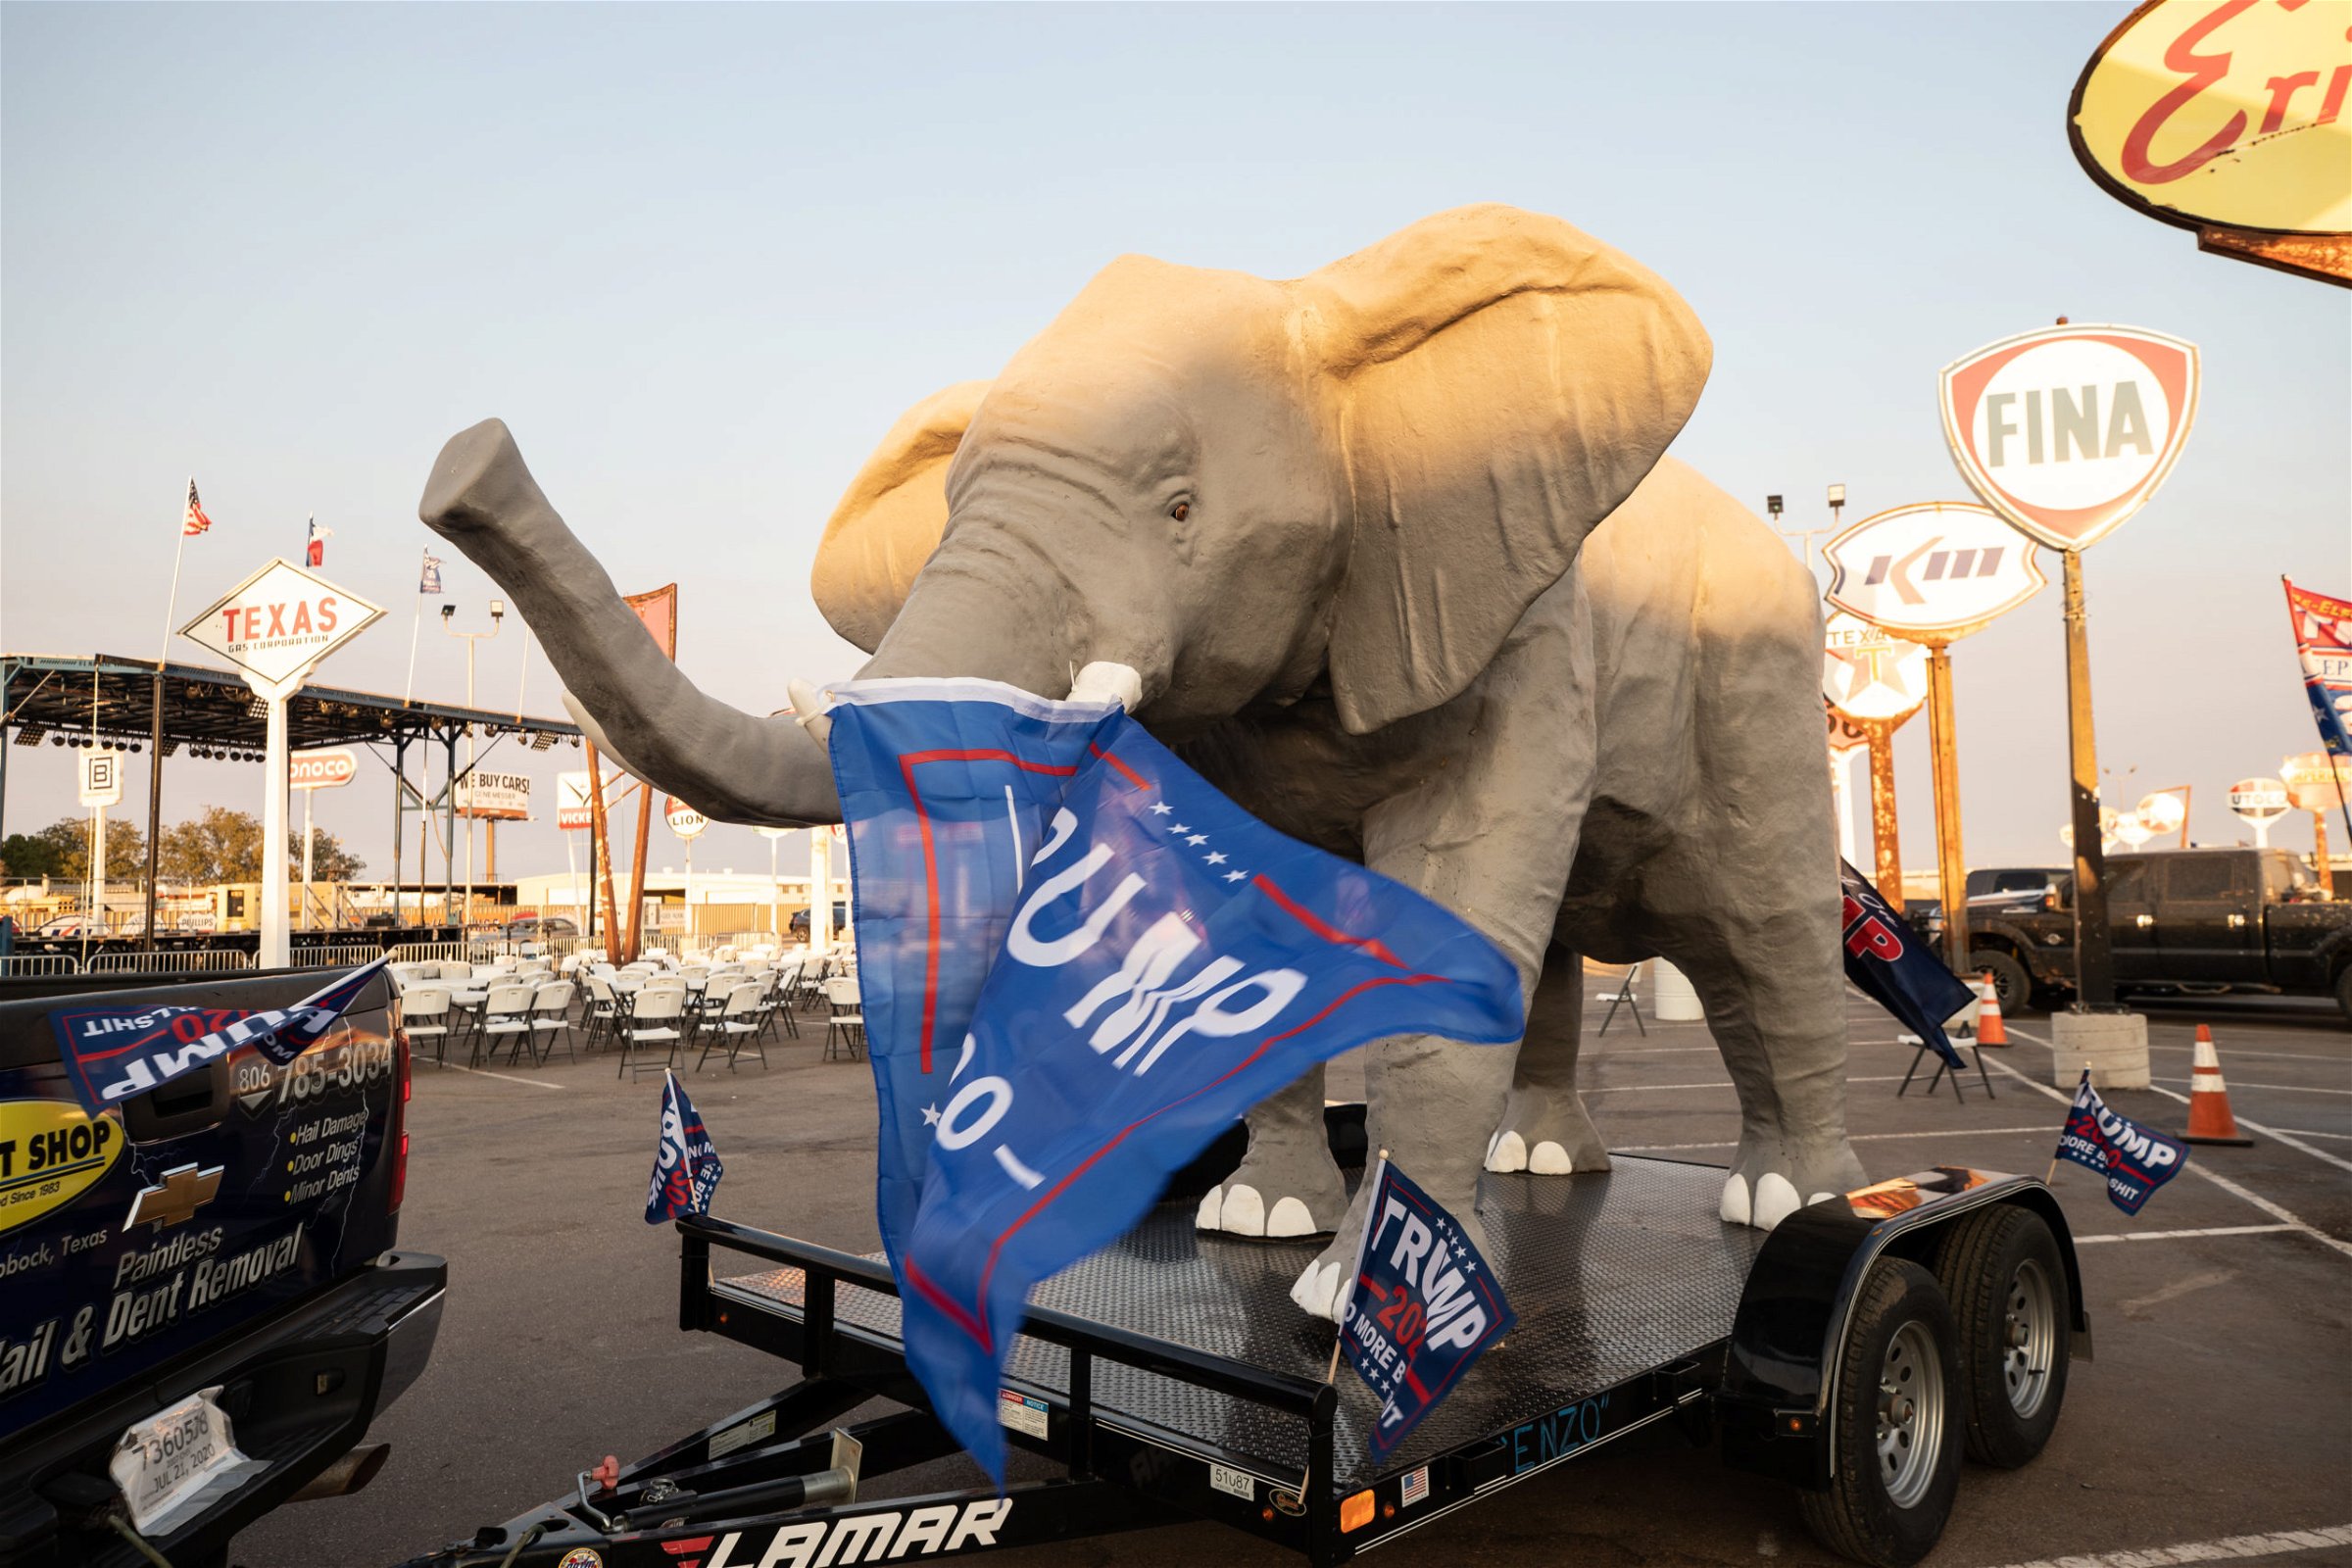 A truck pulled a large elephant on a trailer with multiple Trump flags attached during a "Trump Train" car parade in Lubbock, Texas, on Sunday, Oct. 18, 2020. (Kaylee Greenlee - DCNF)